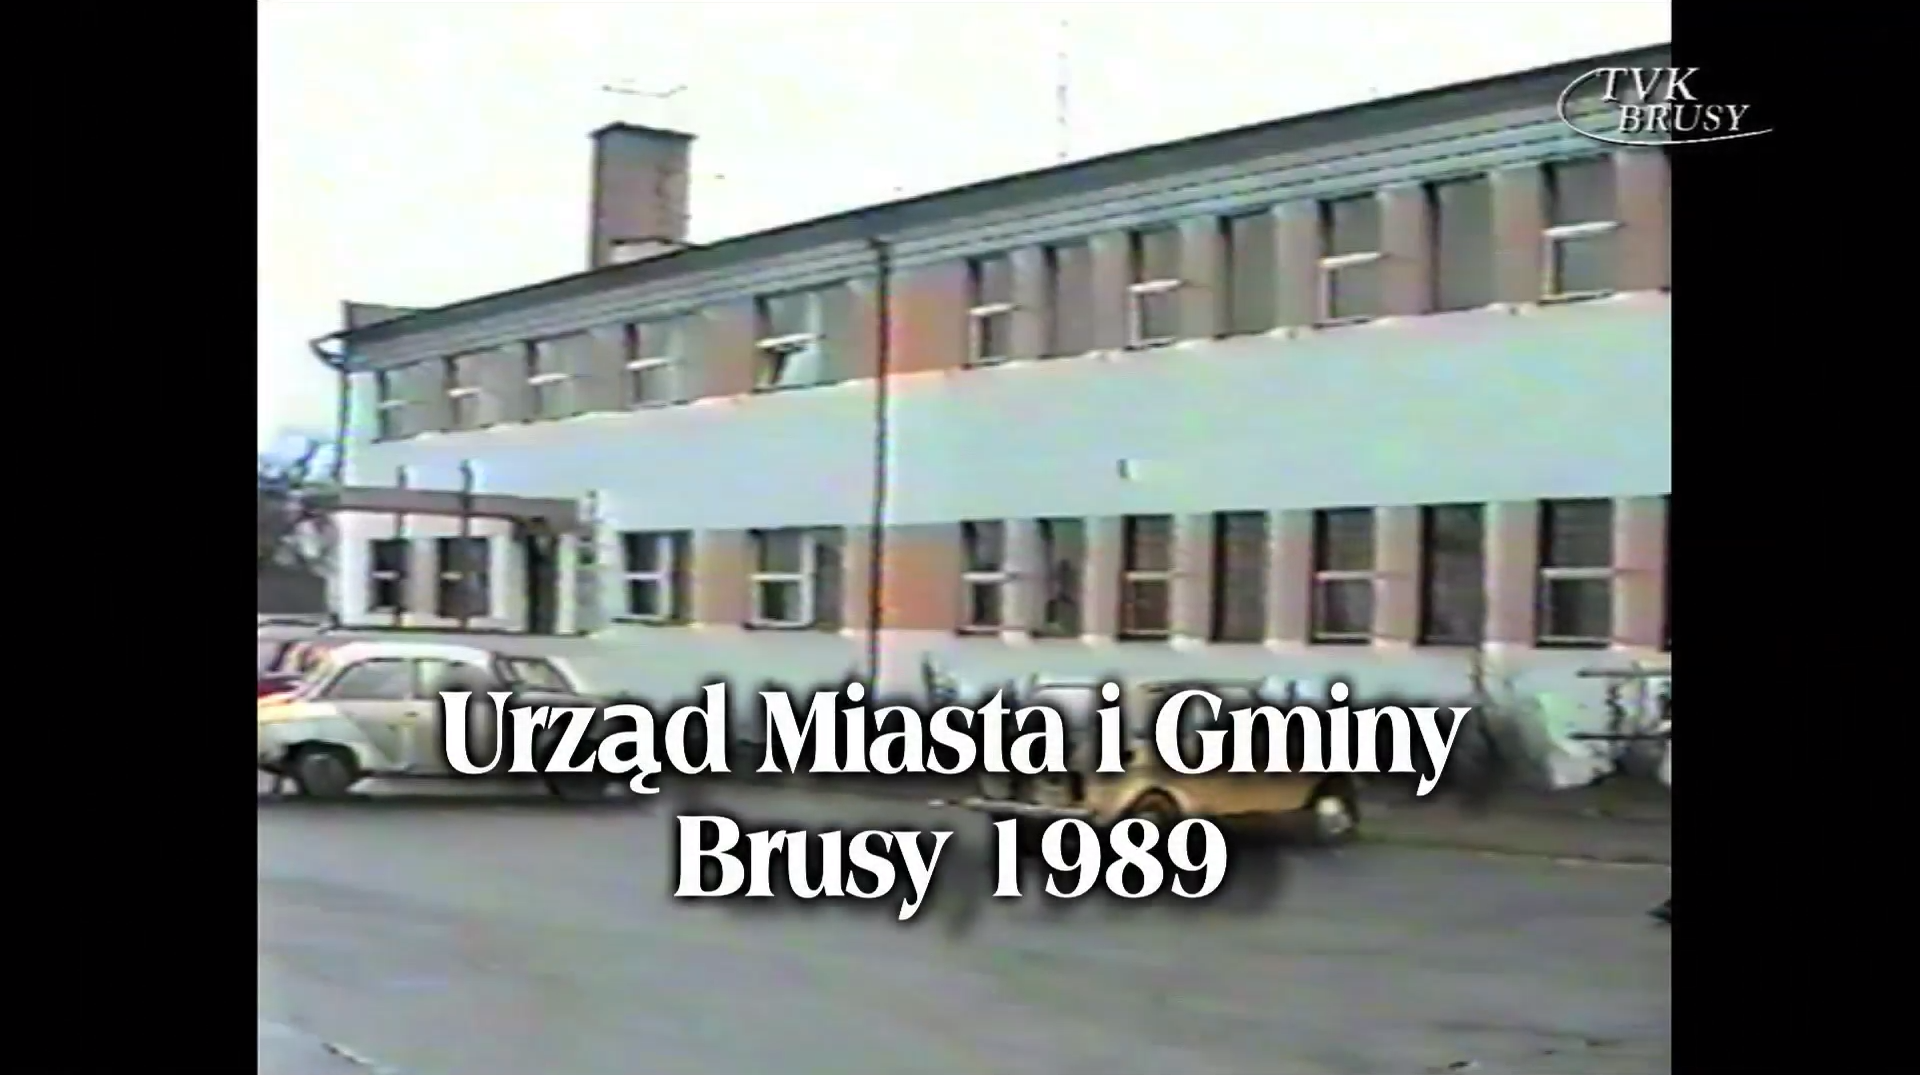 Brusy_1989.png